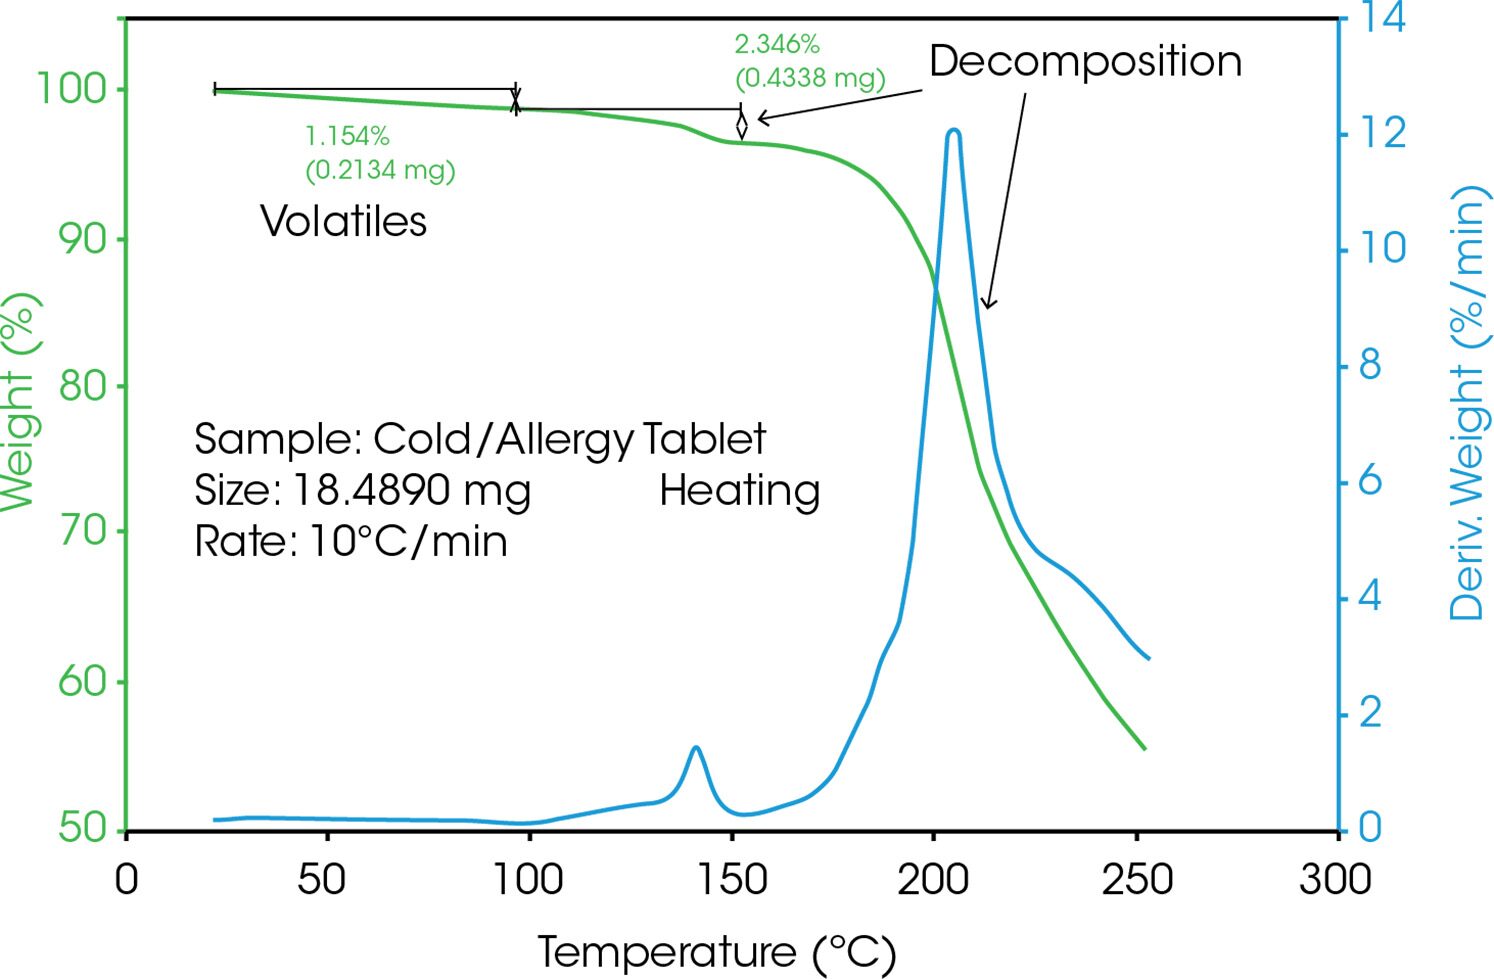 Figure 3: TGA analysis of an allergy tablet